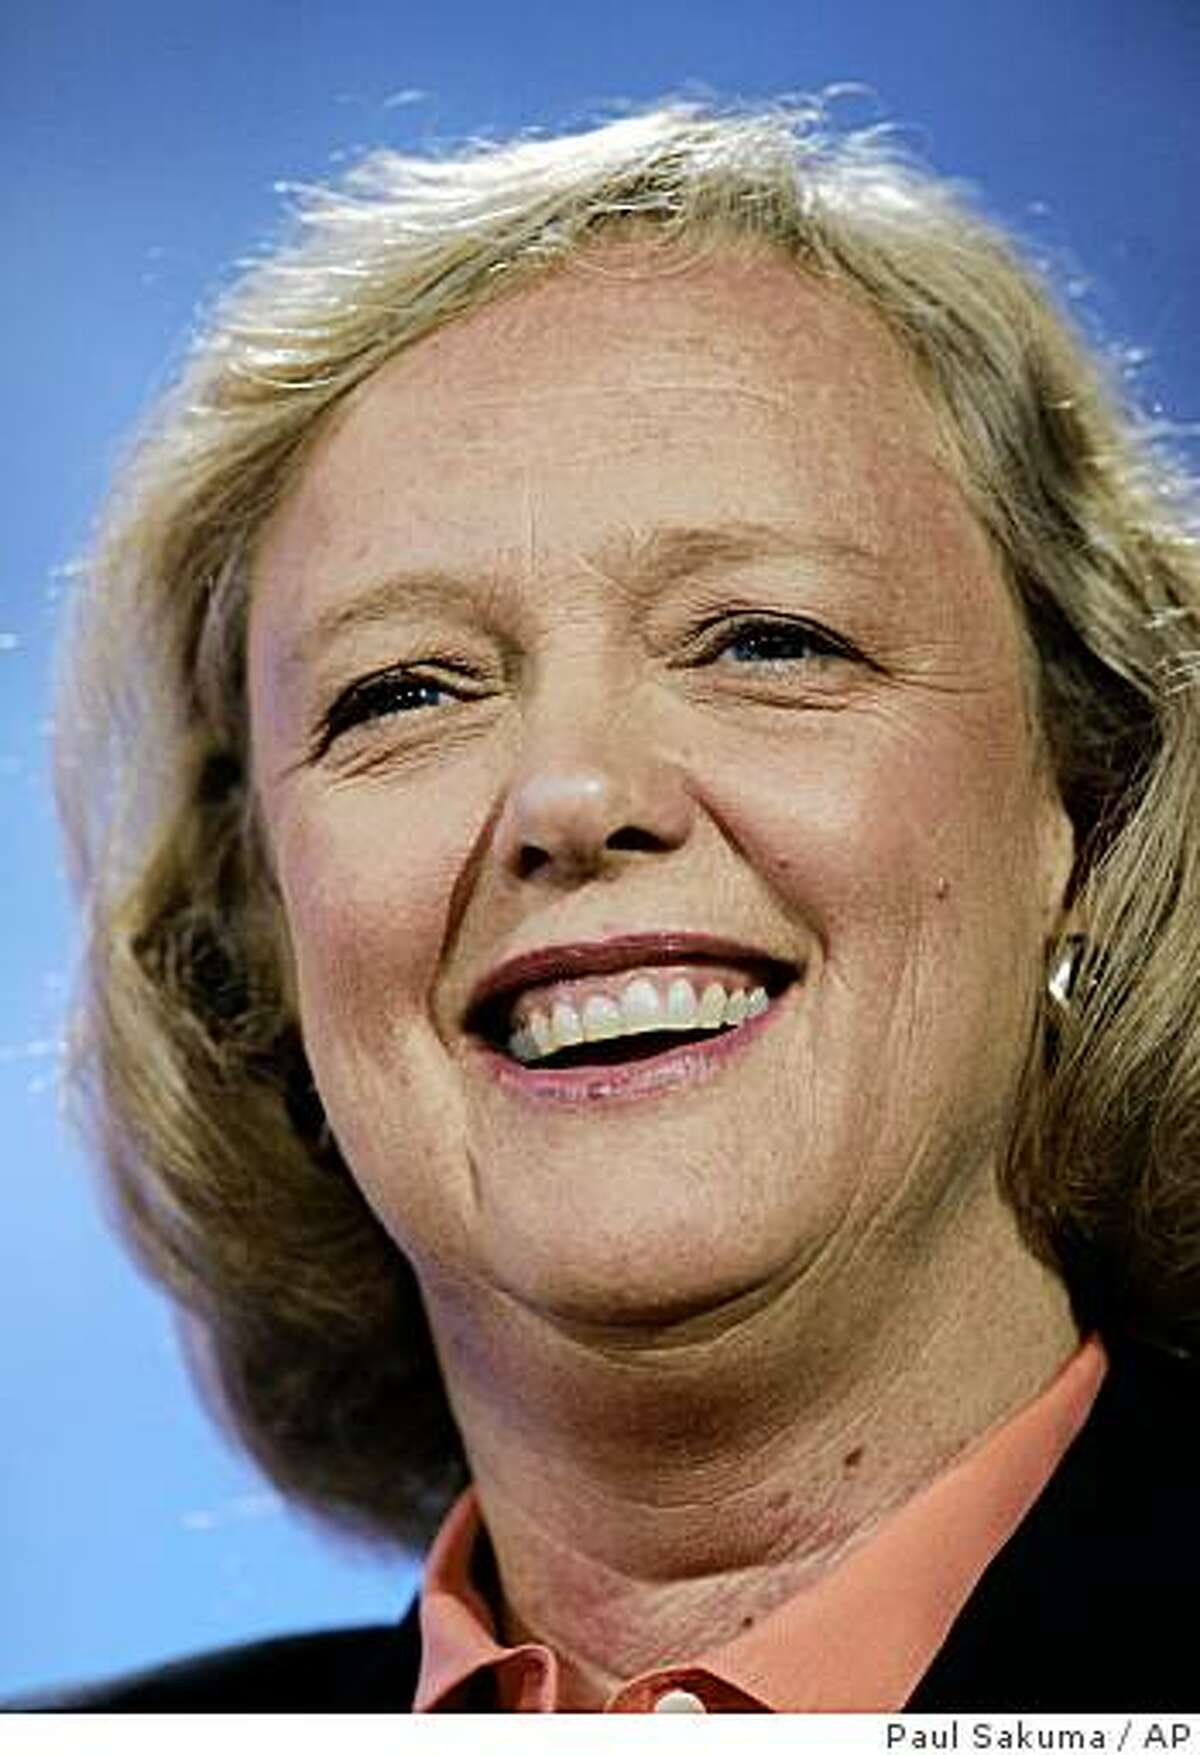 Former eBay Chief Executive Meg Whitman smiles as she speaks the Web 2.0 conference in San Francisco, Oct. 18, 2007. Whitman officially launched her bid to seek the Republican nomination for California governor on Monday, Feb. 9, 2009 capping a yearlong tour on the political stage after leaving her high-profile Silicon Valley post. (AP Photo/Paul Sakuma)